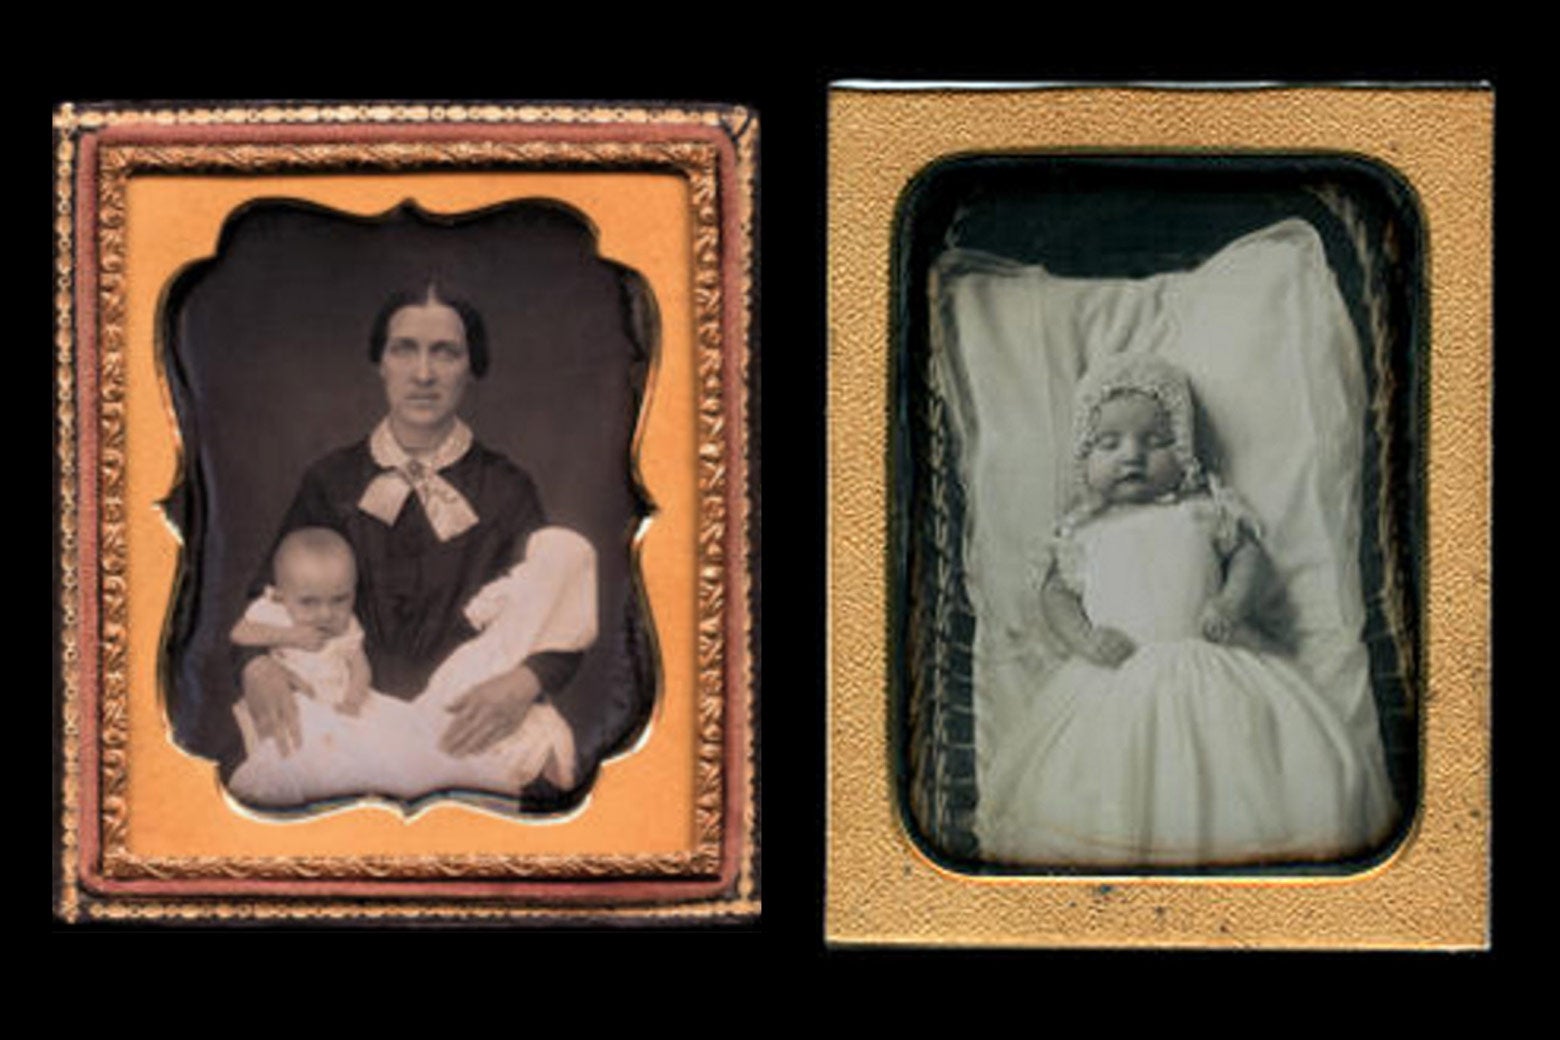 Victorian death photos: A mother holds two children at left, a baby is pictured at right.